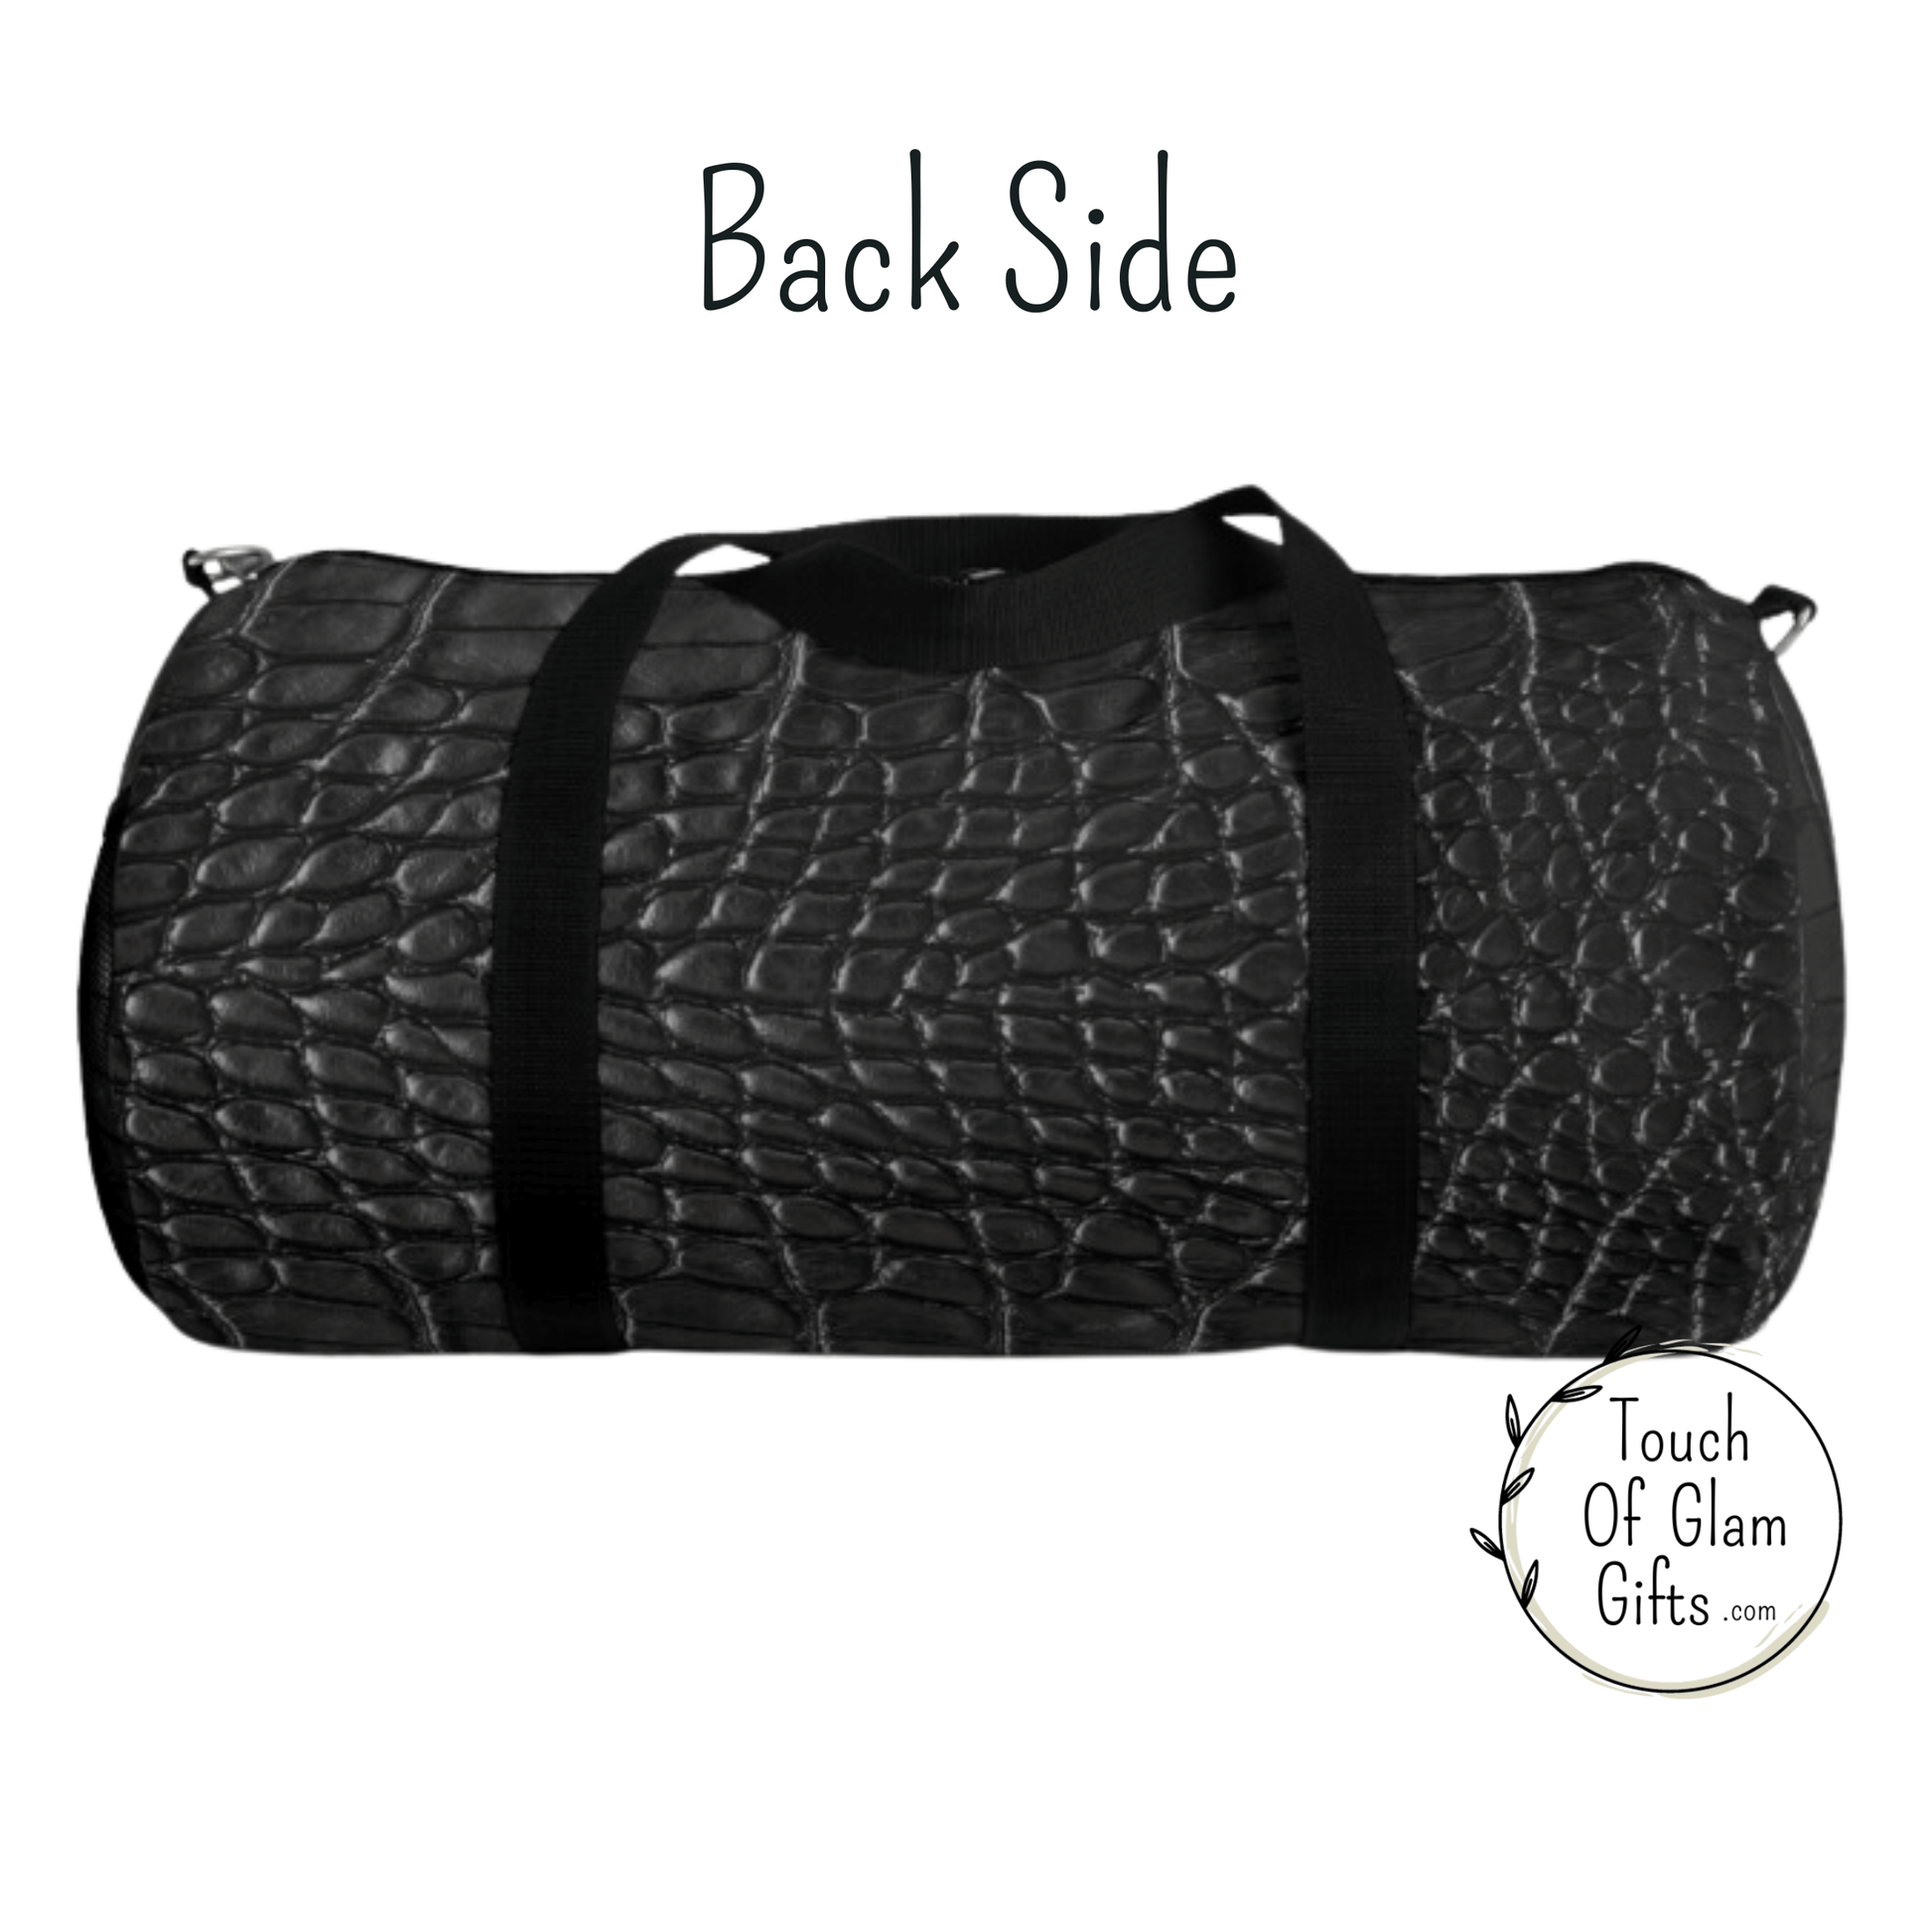 The back side of the duffel bag shows the faux dark grey snakeskin print on canvas duffel bag. 